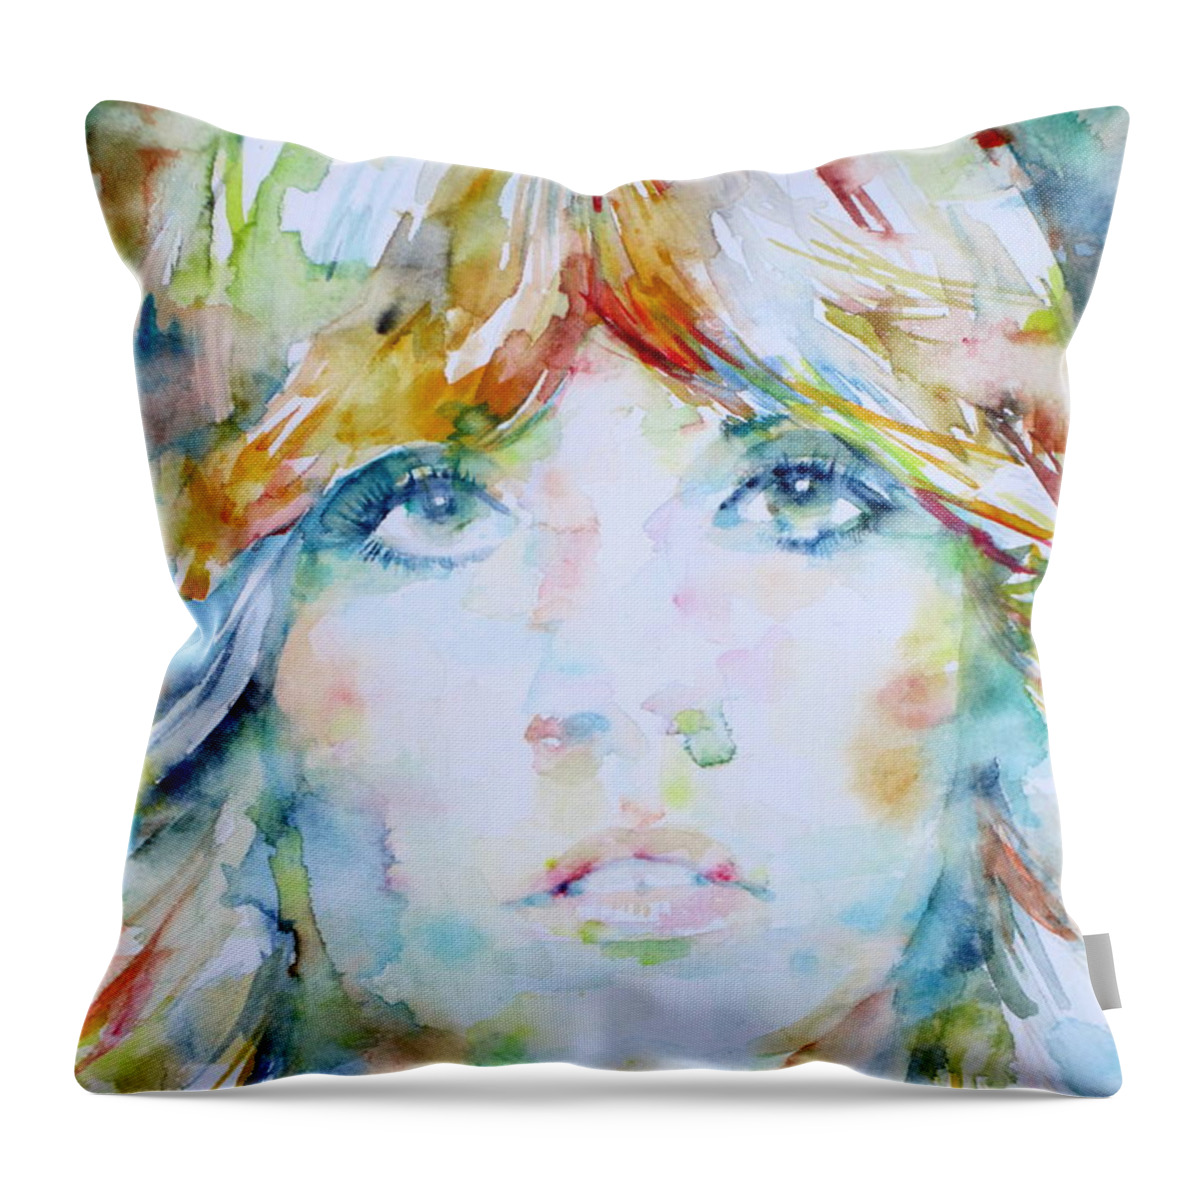 Stevie Nicks Throw Pillow featuring the painting STEVIE NICKS - watercolor portrait by Fabrizio Cassetta